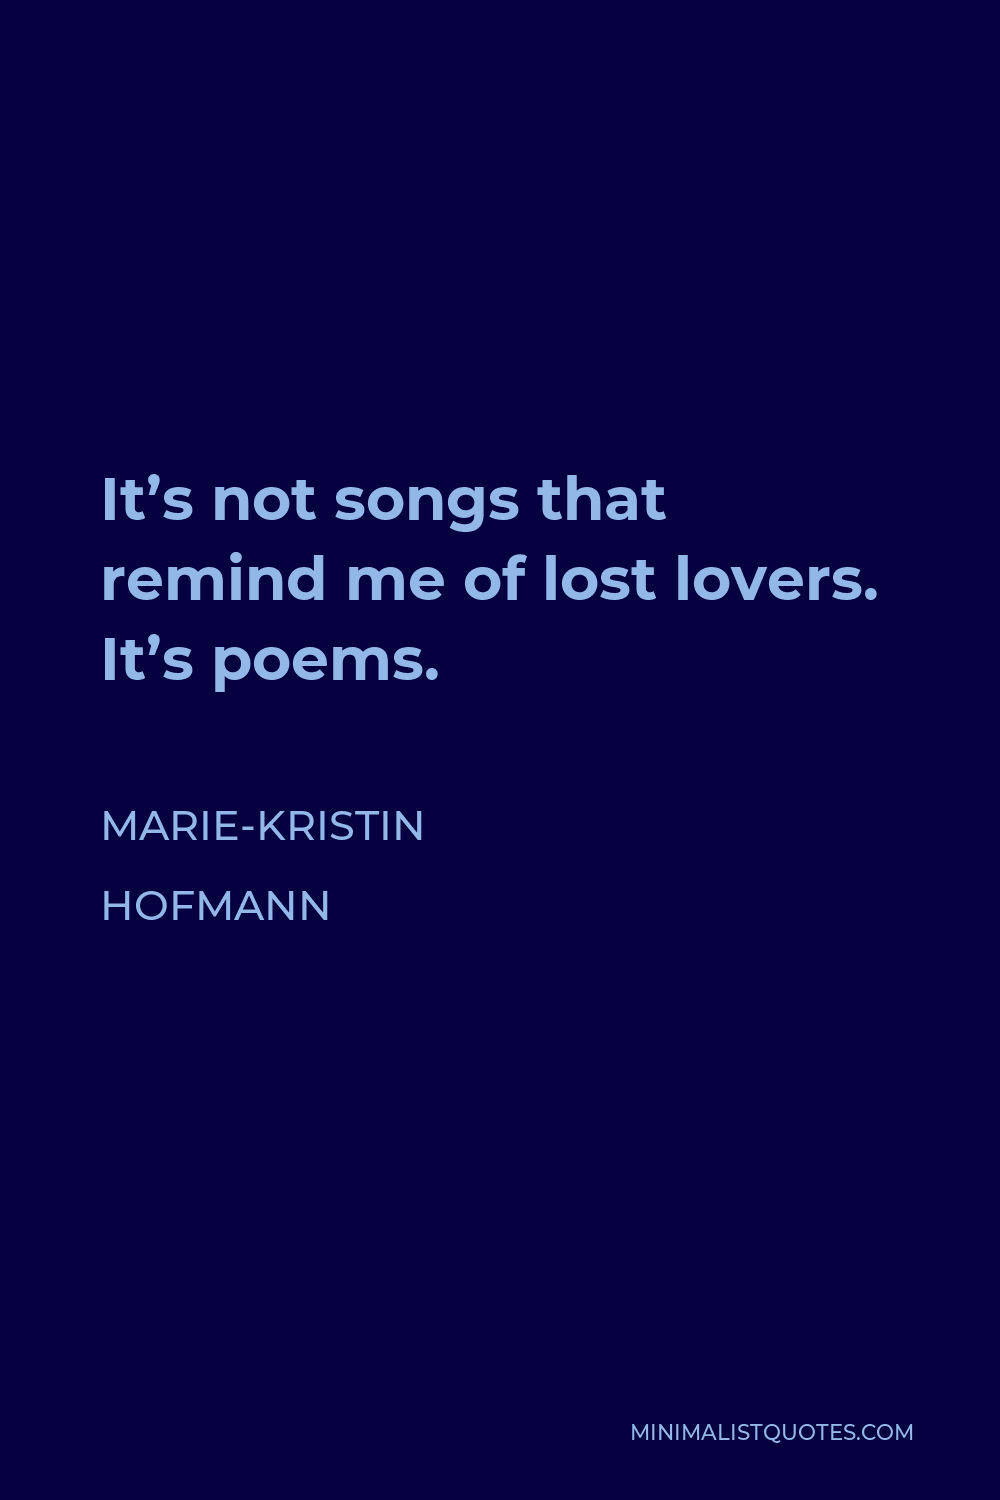 Marie-Kristin Hofmann Quote - It’s not songs that remind me of lost lovers. It’s poems.